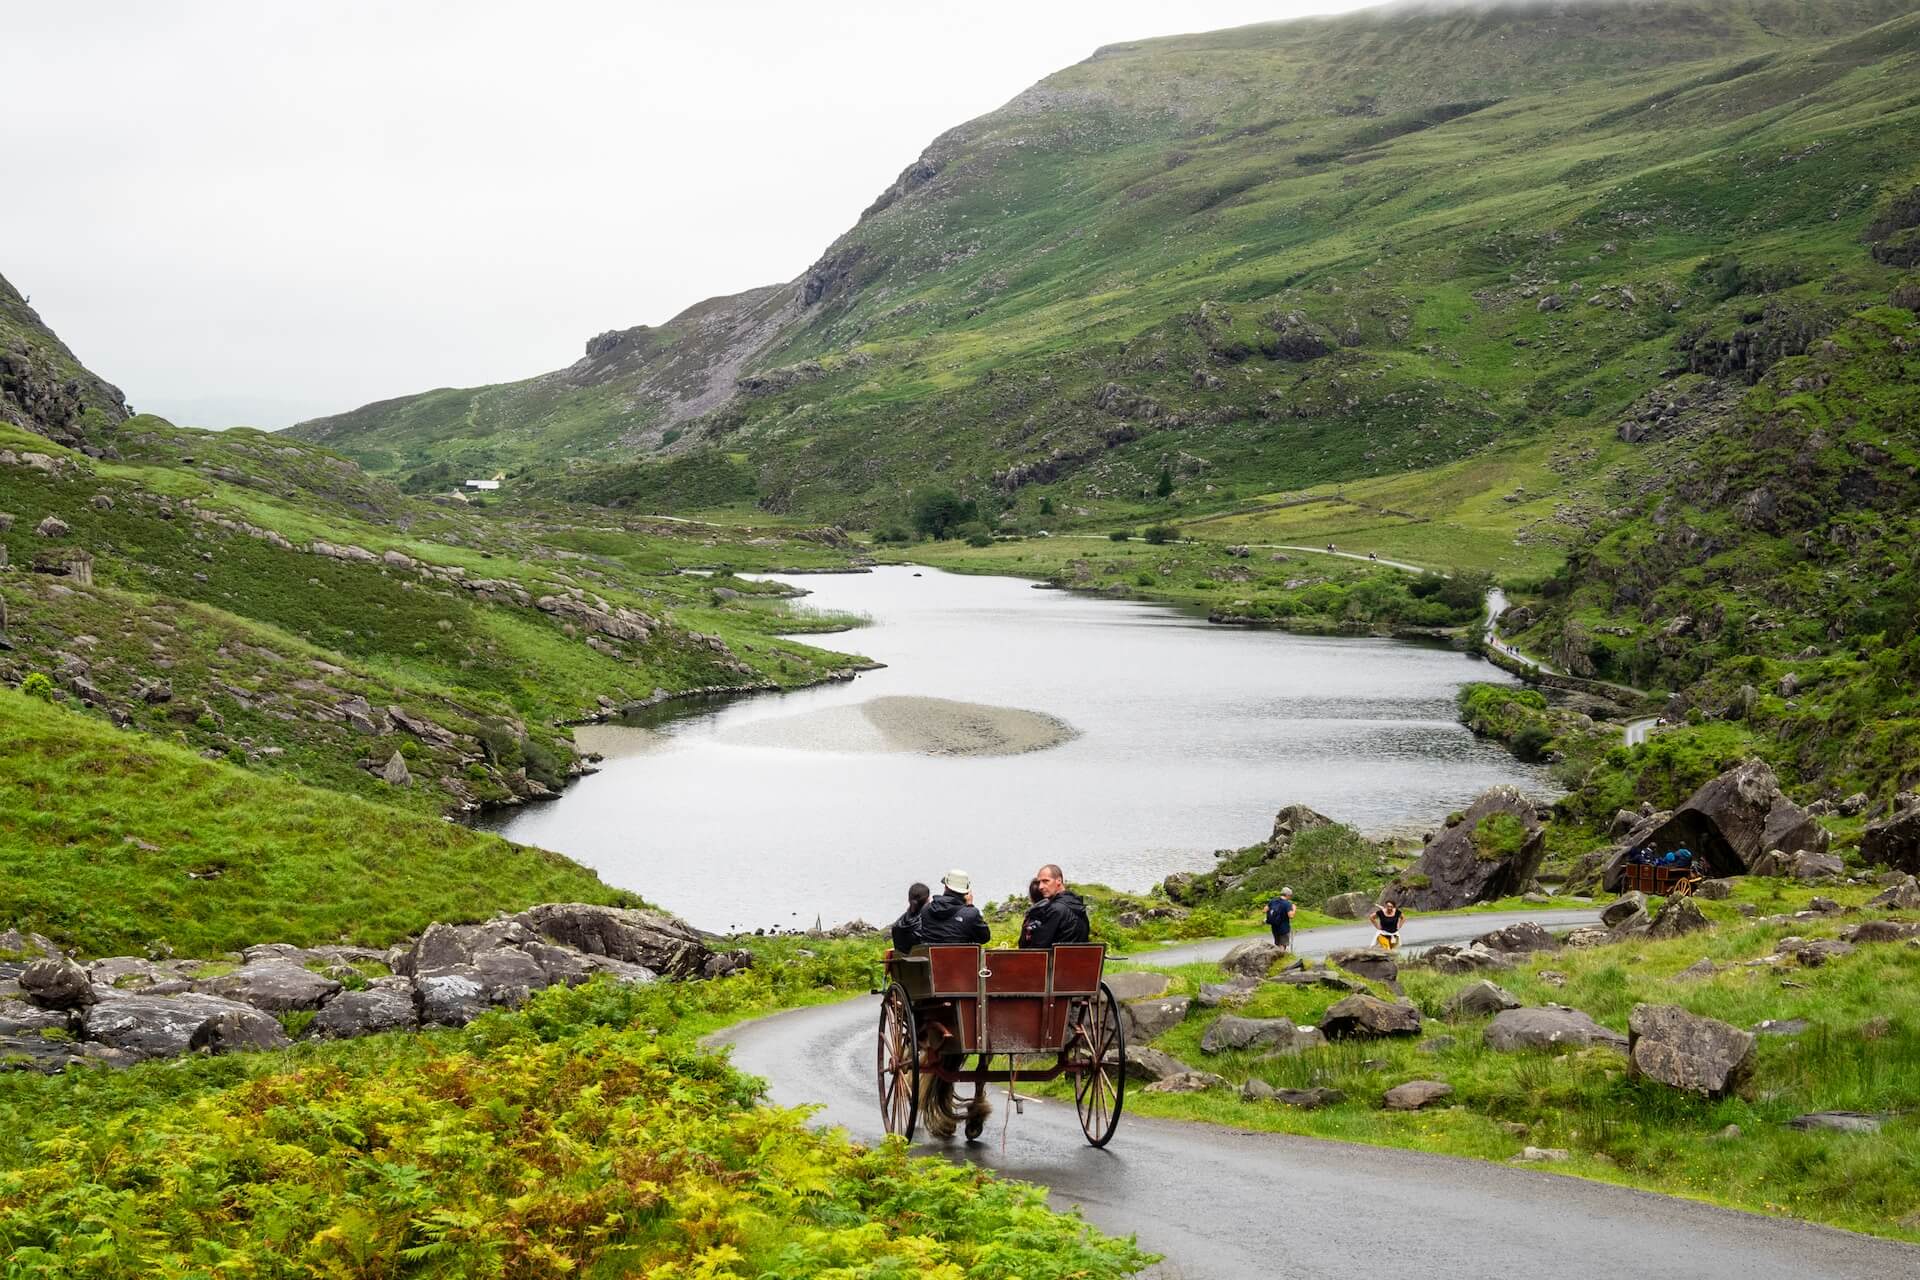 People riding a horse and carriage (jaunting car) through the green hills of Ireland. Photo: Andre Ouellet